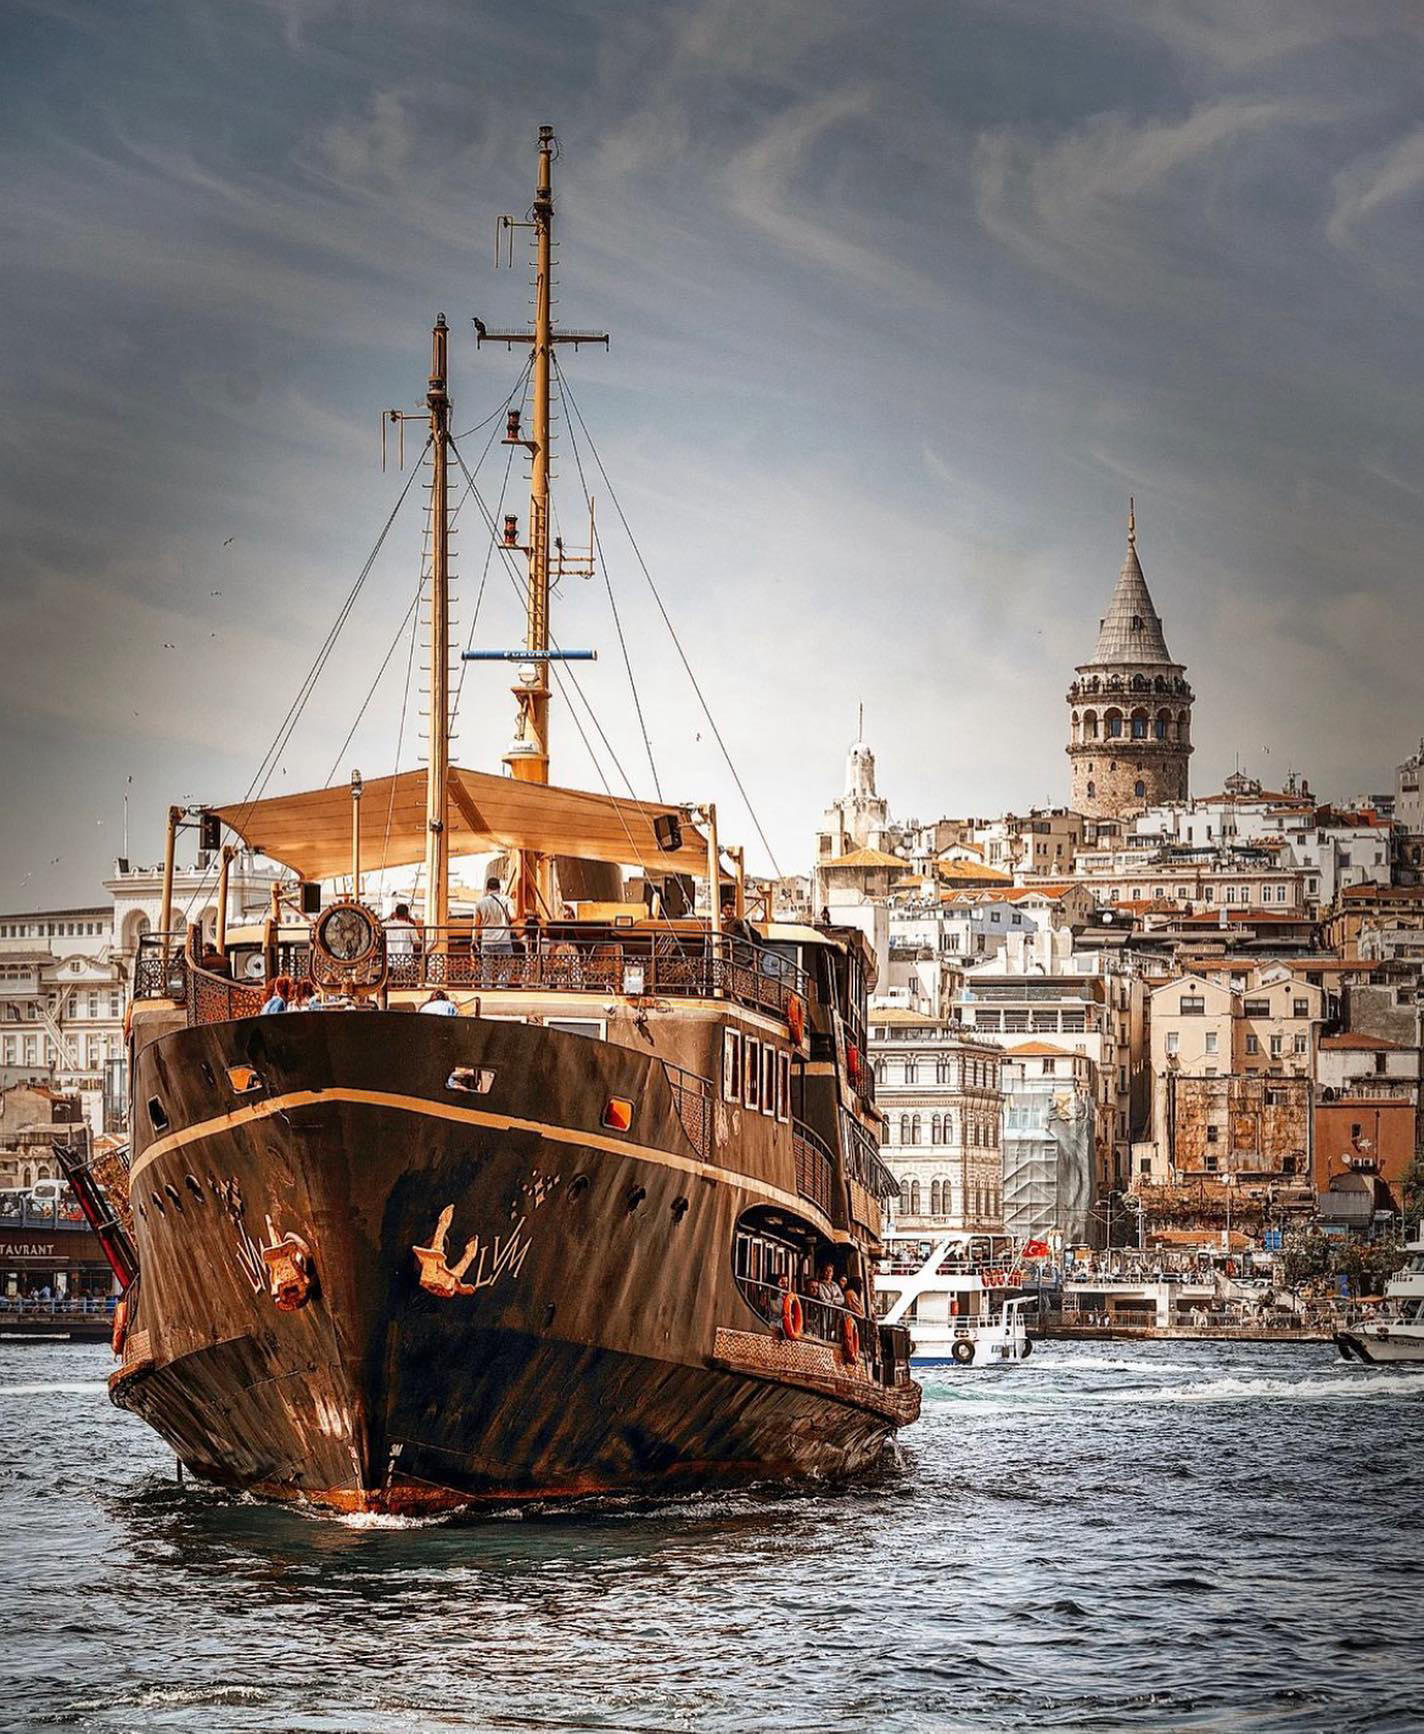 #istanbul - Every corner of Istanbul is just like time travel